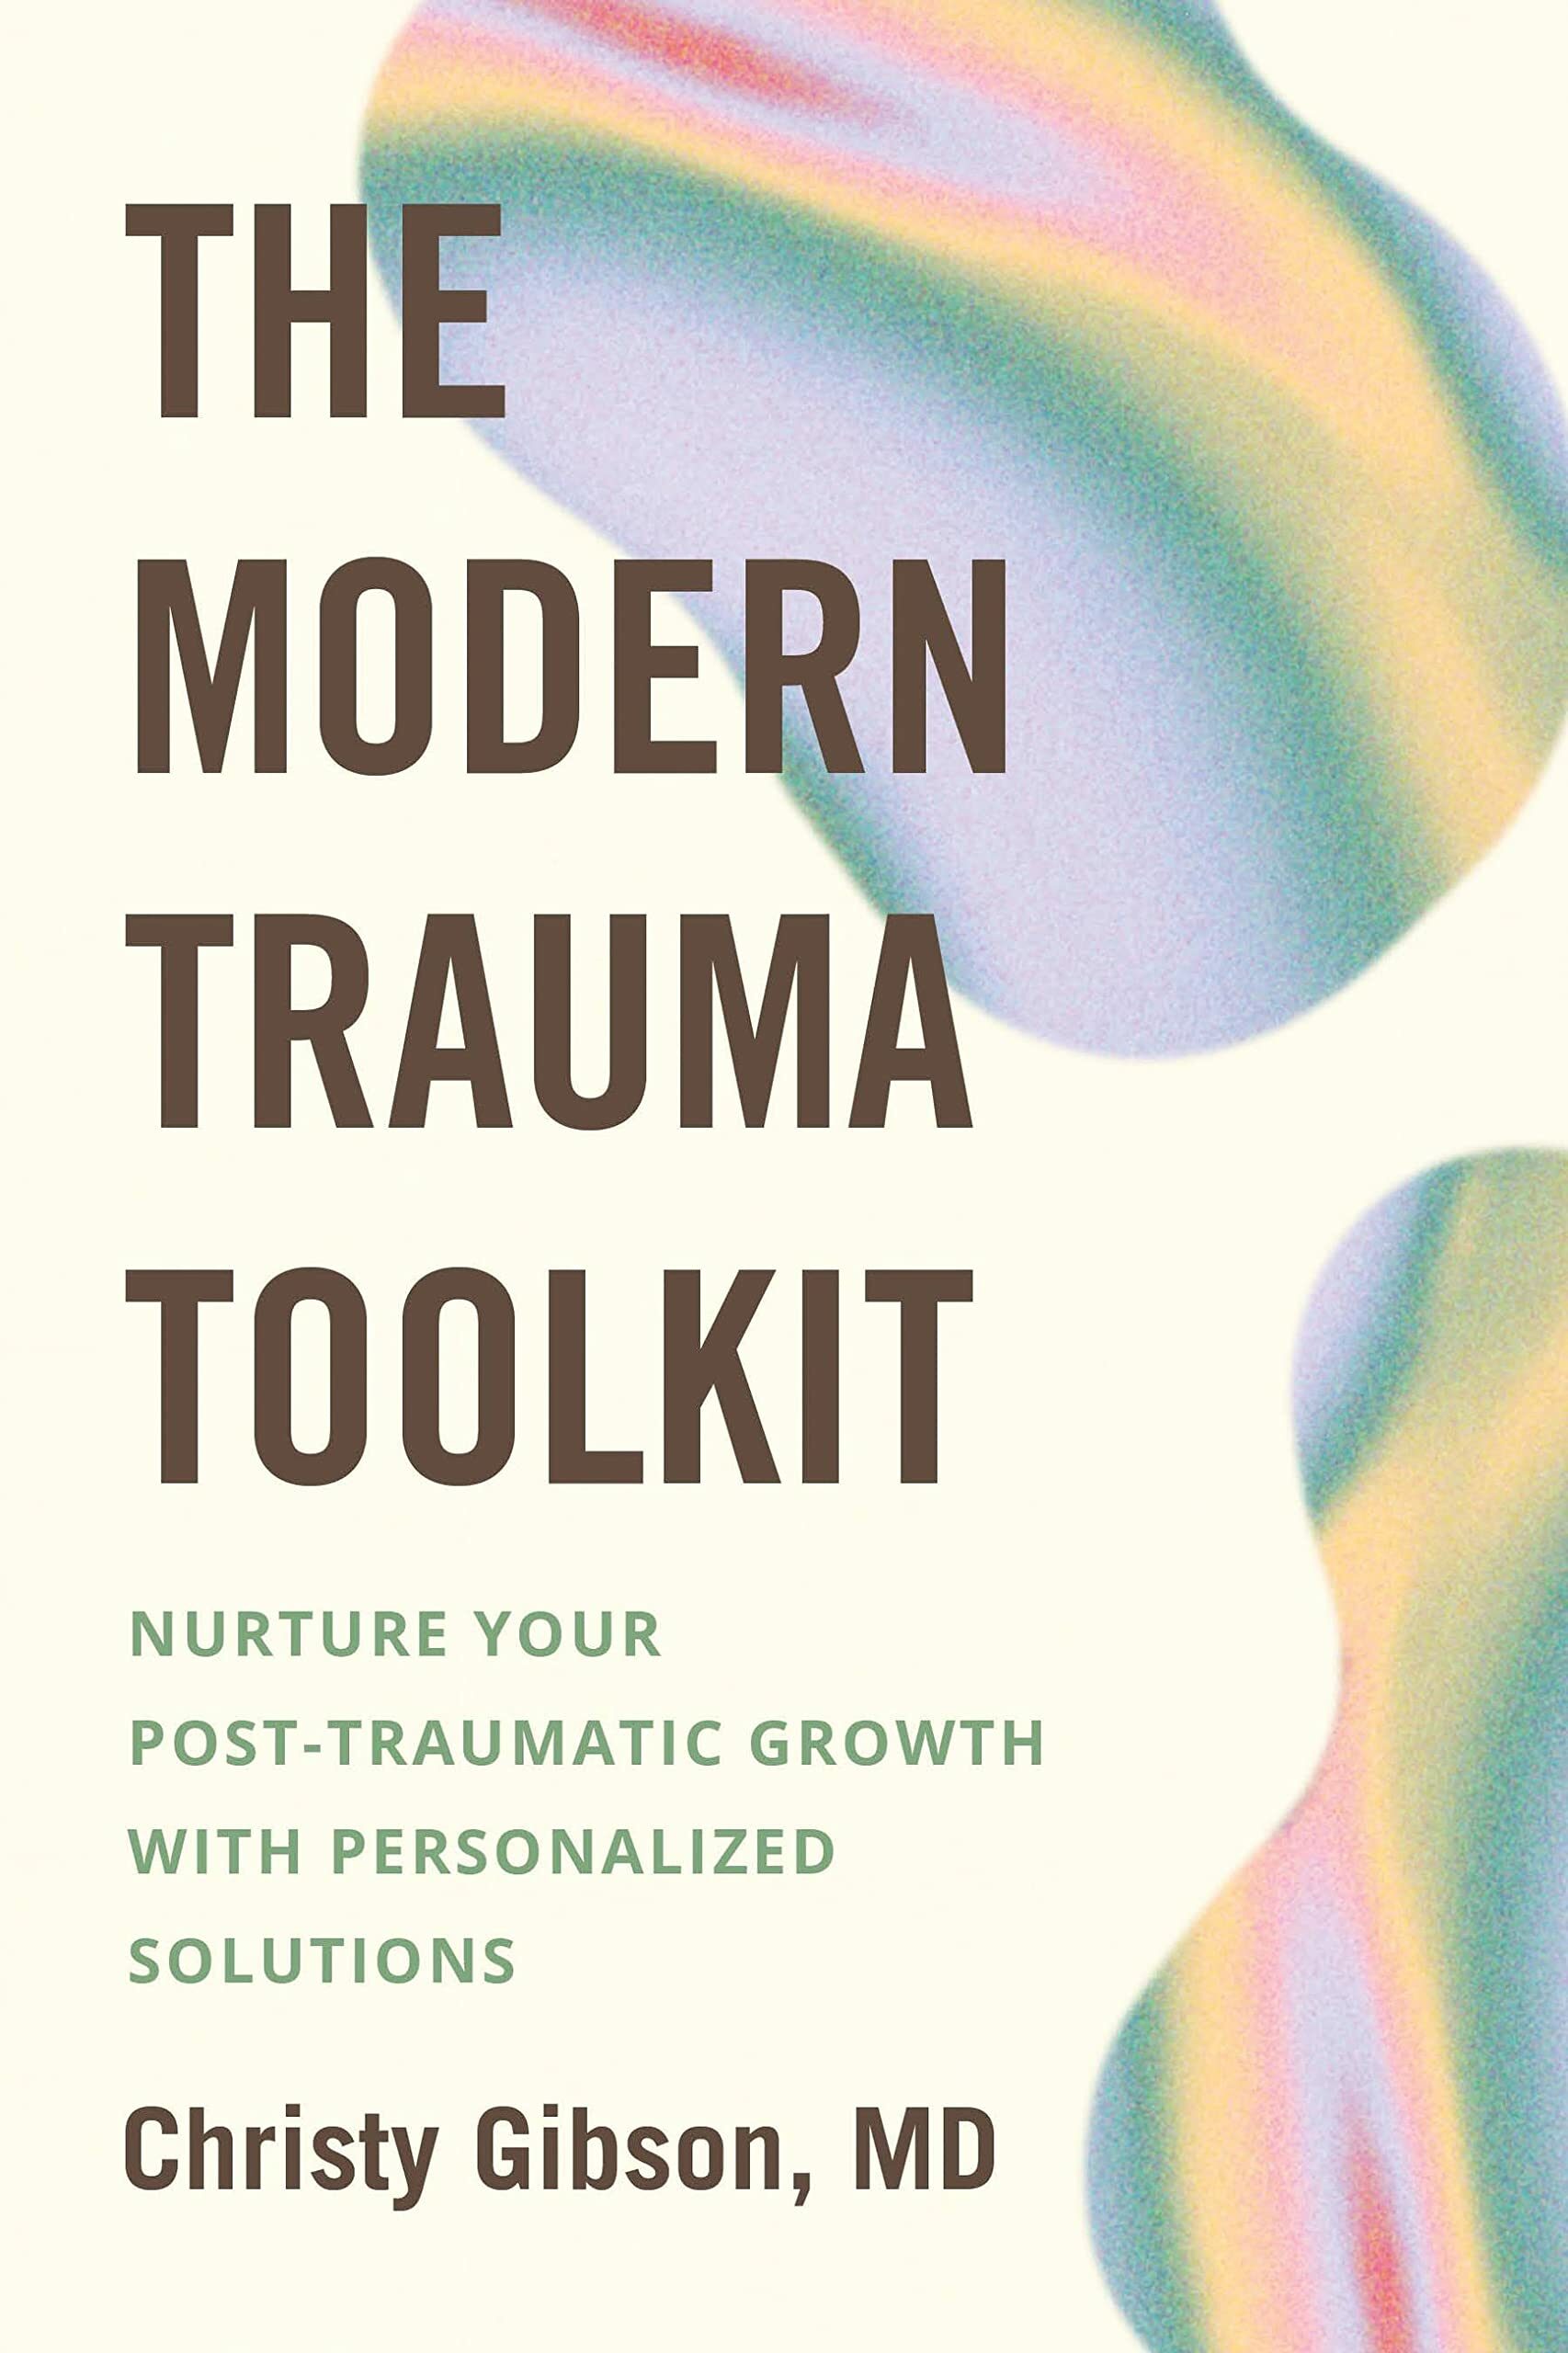 The Modern Trauma Toolkit: Nurture Your Post-Traumatic Growth with Personalized Solutions